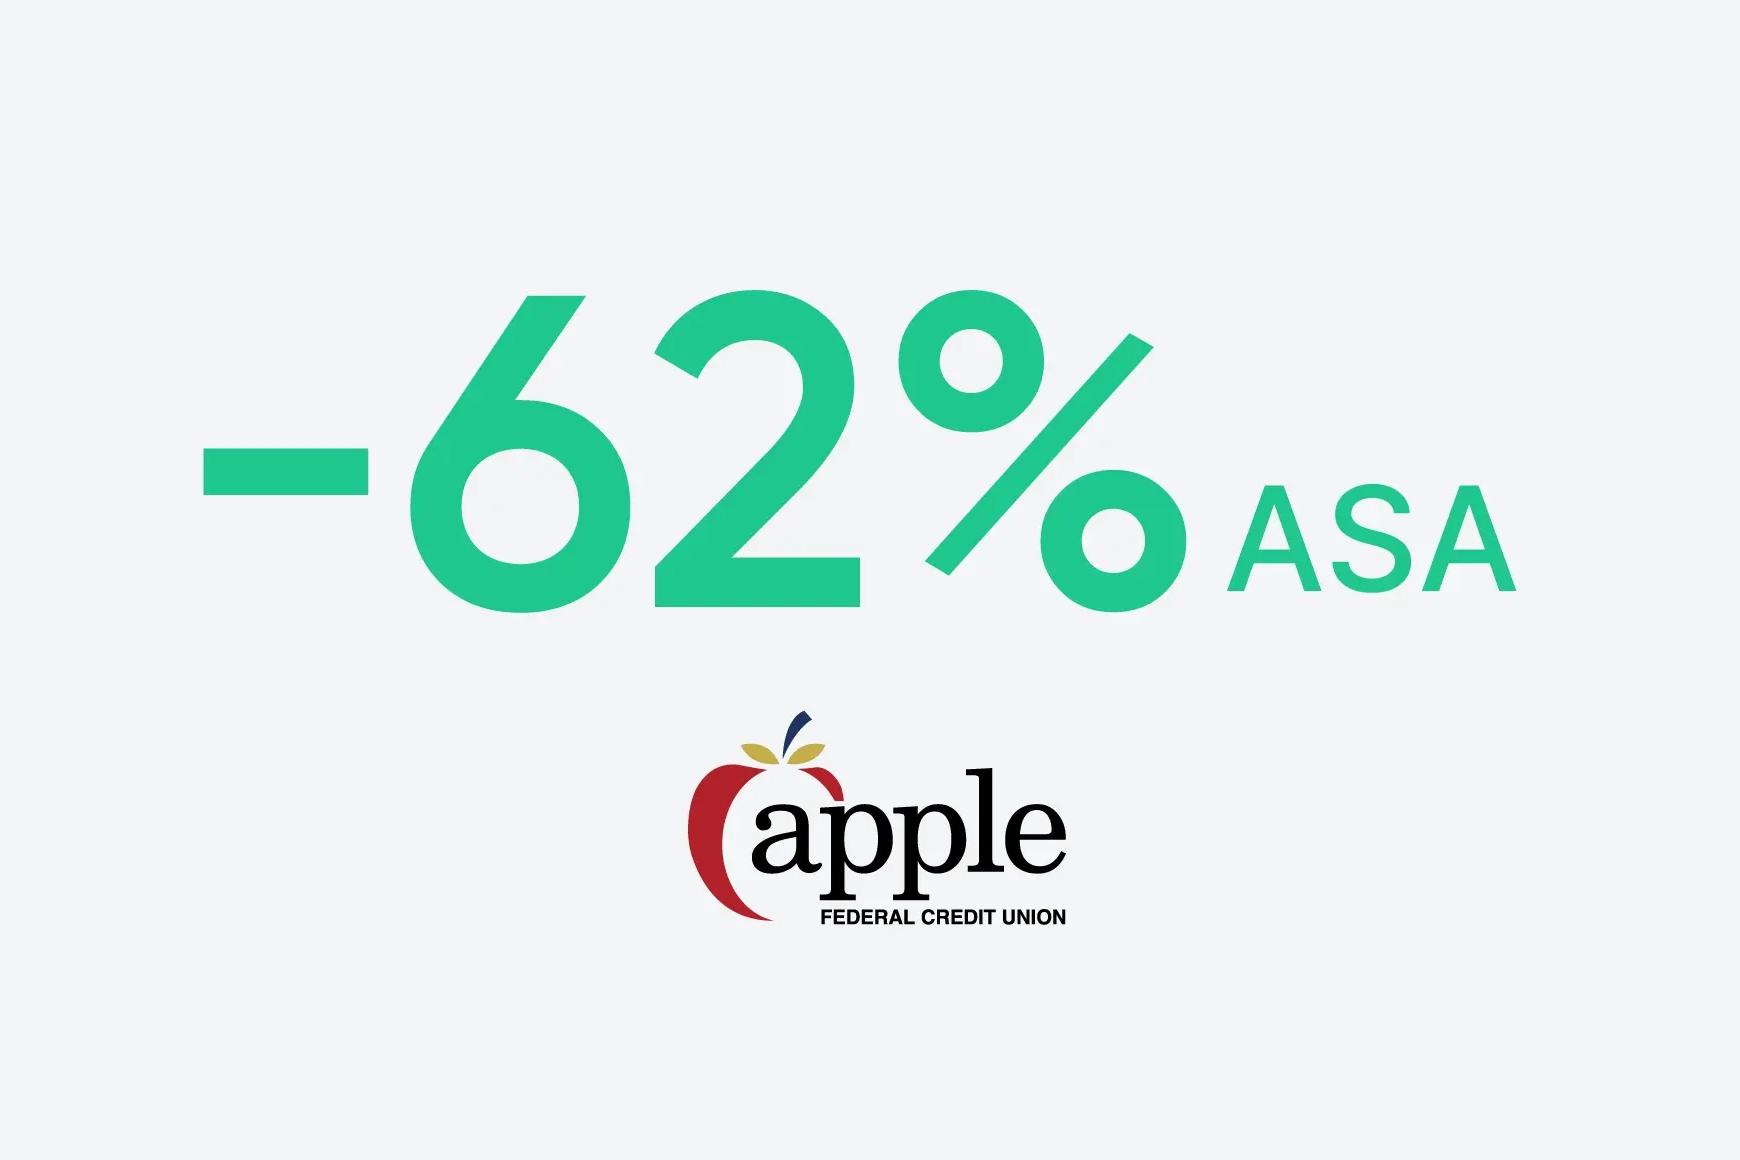 Apple Federal Credit Union reduced ASA by 62%